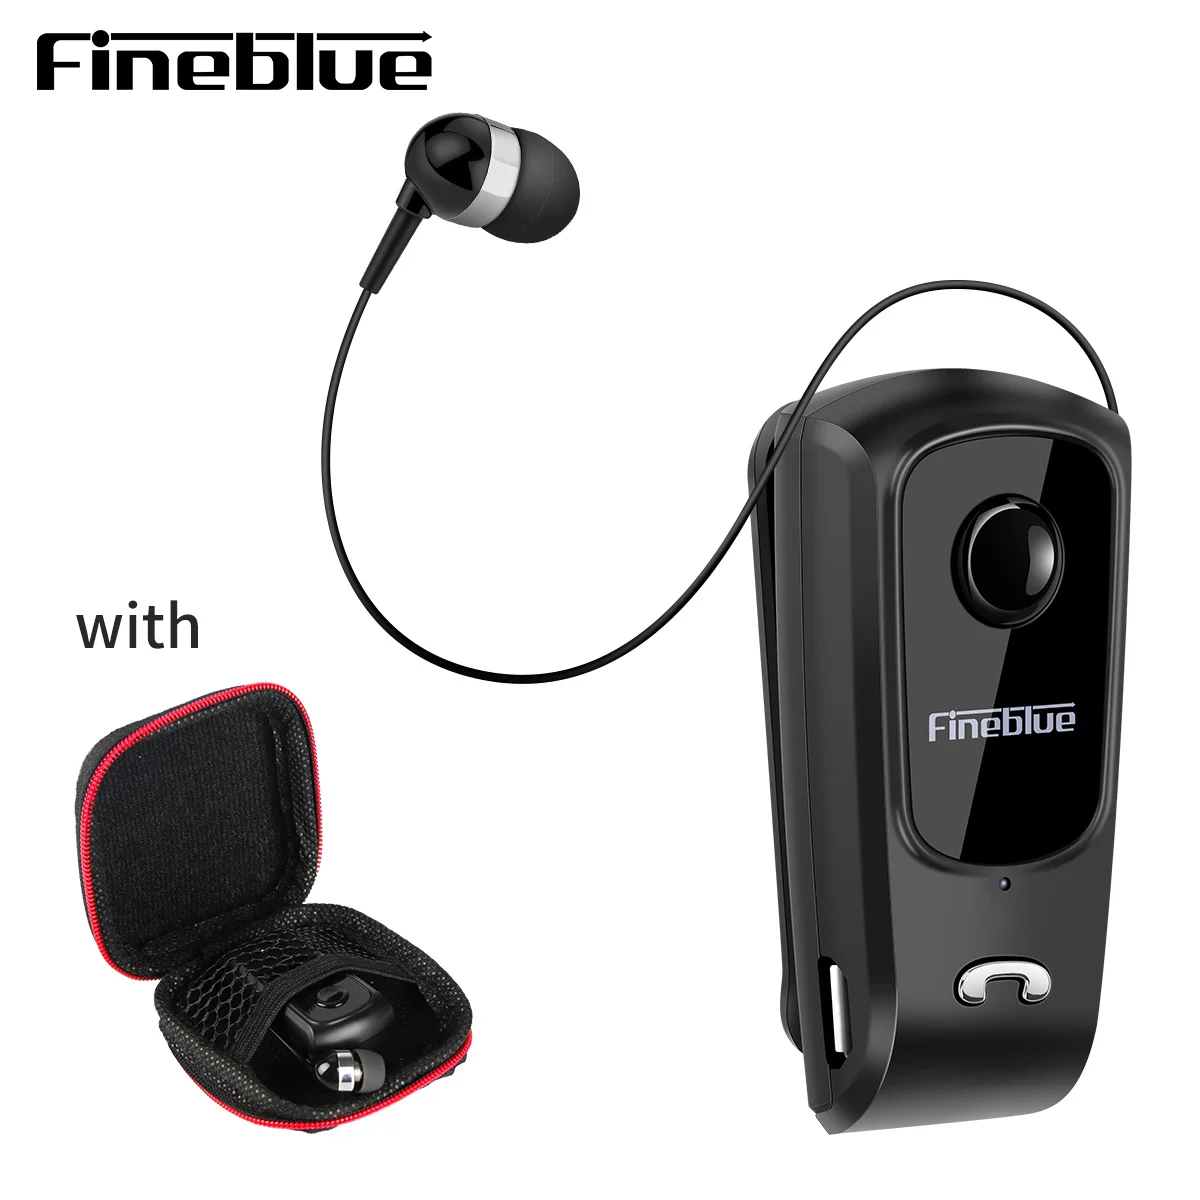 

NEW Fineblue F920 Wireless Bluetooth business Earphone Vibration Alert Wear Stereo Sport Auriculares With Mini Bag